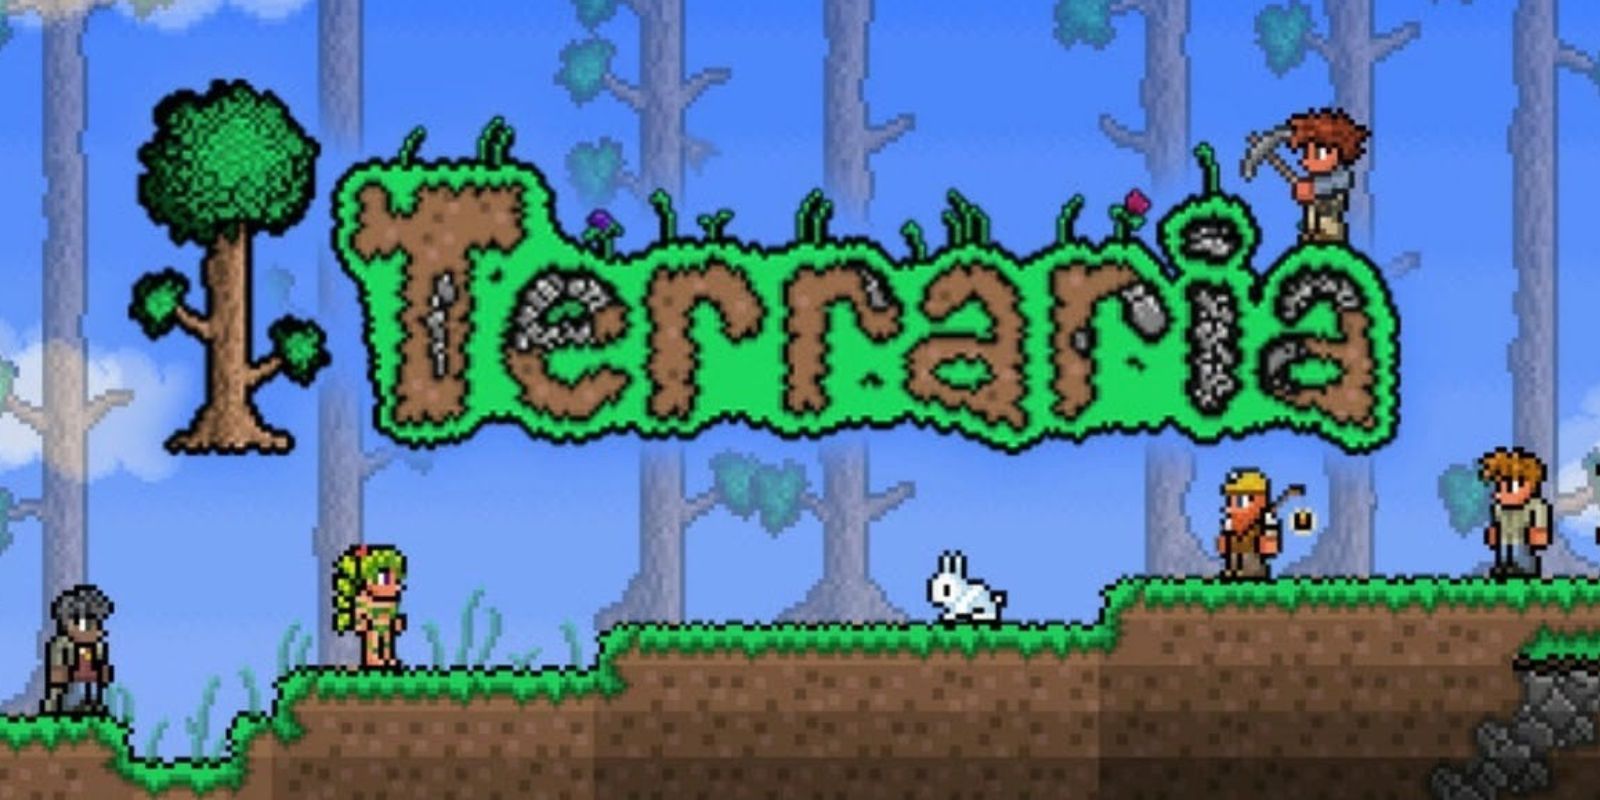 The logo from the video game Terraria